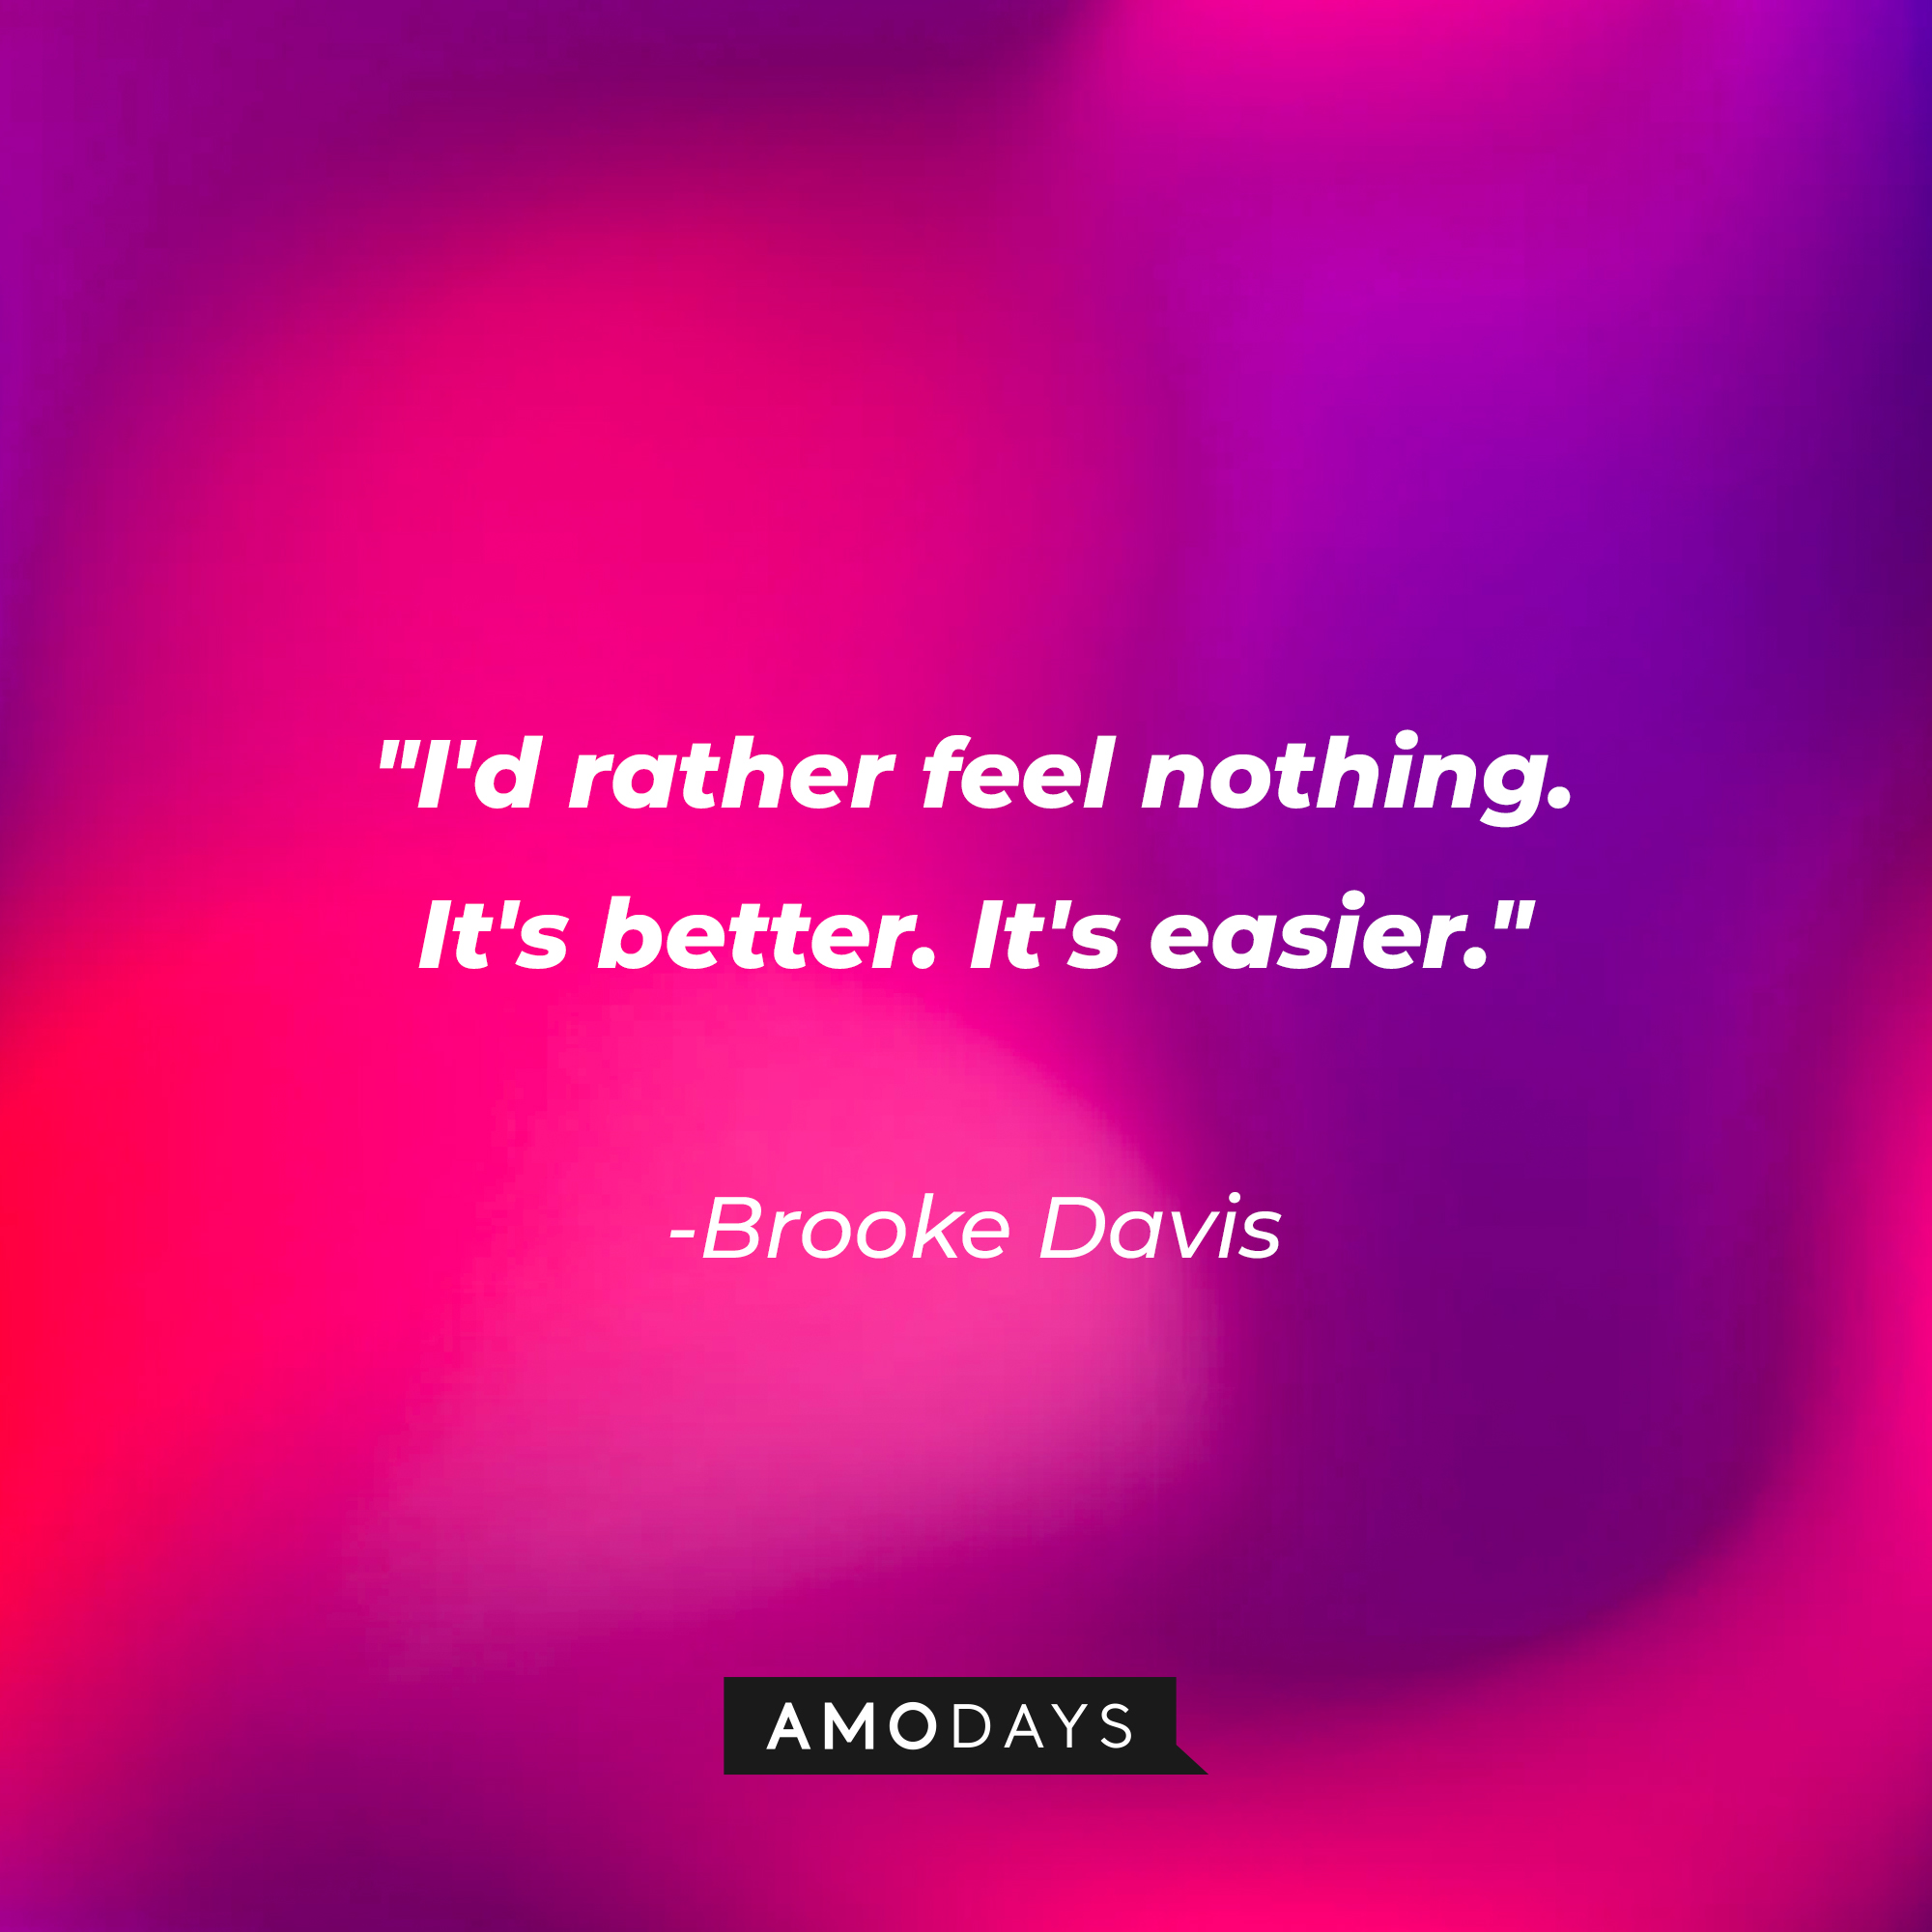 Brooke Davis' quote: "I'd rather feel nothing. It's better. It's easier." | Source: AmoDays